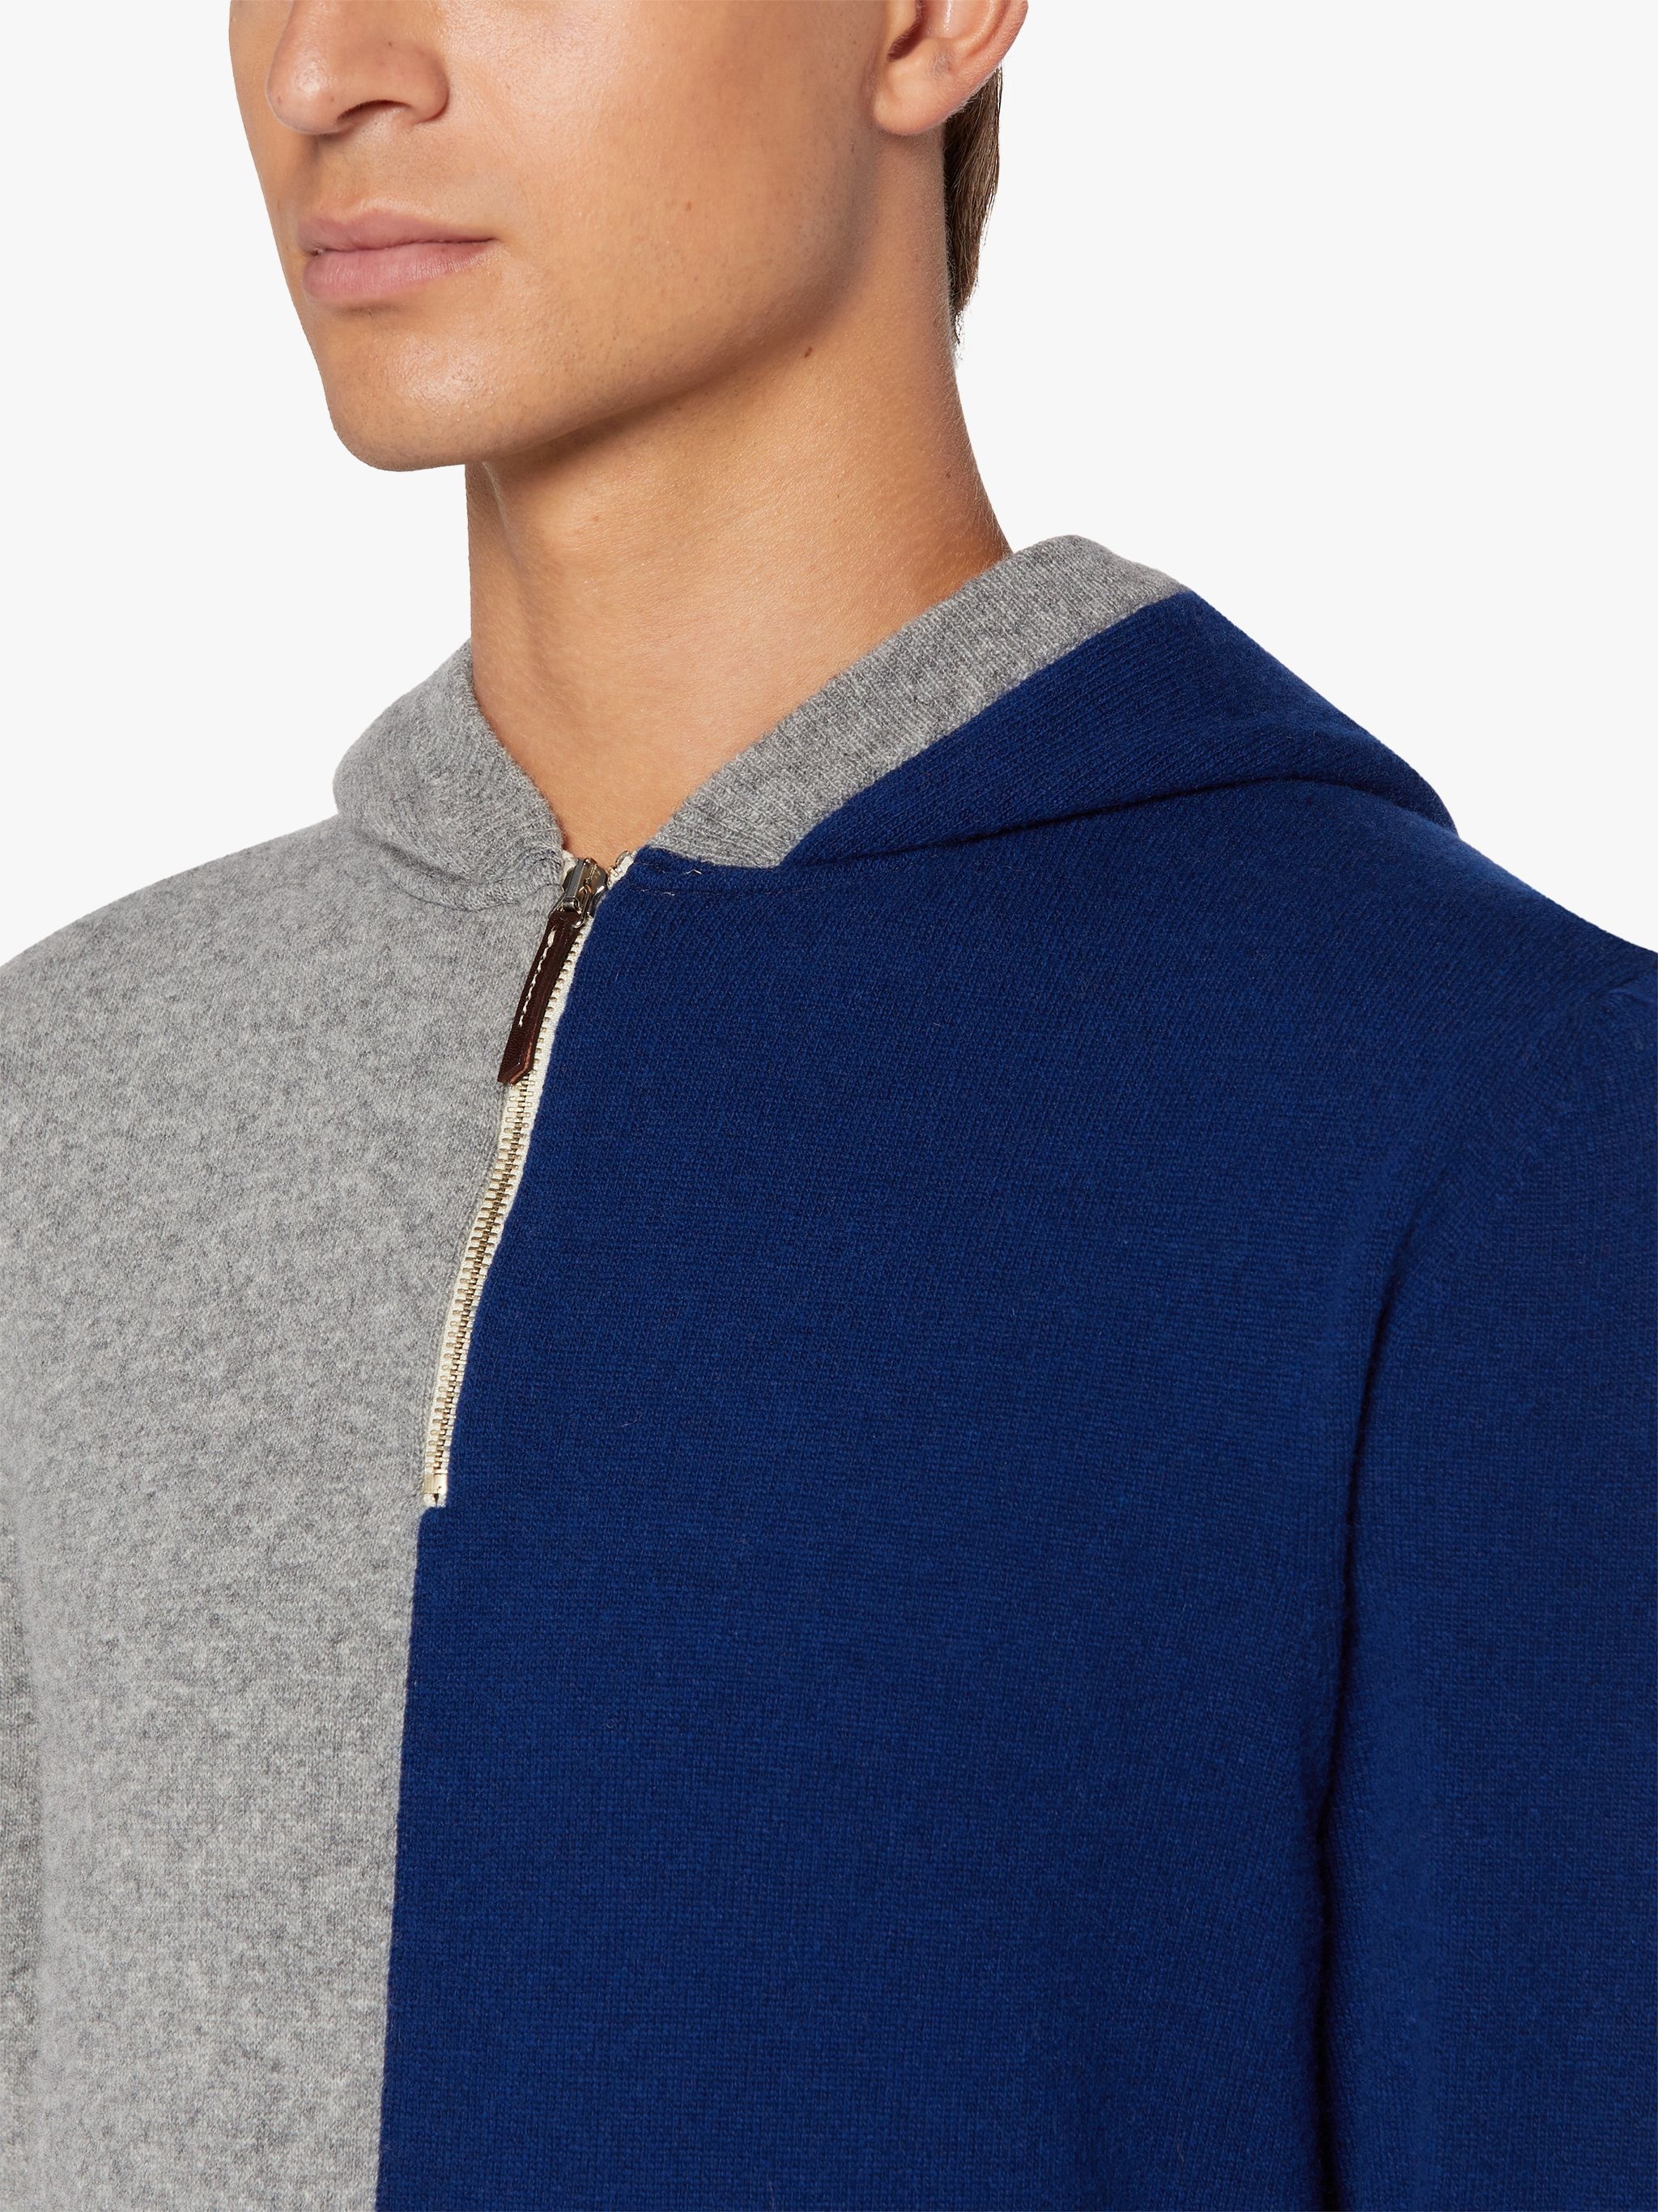 DOUBLE AGENT NAVY WOOL HOODED SWEATER | GKM-201 - 5